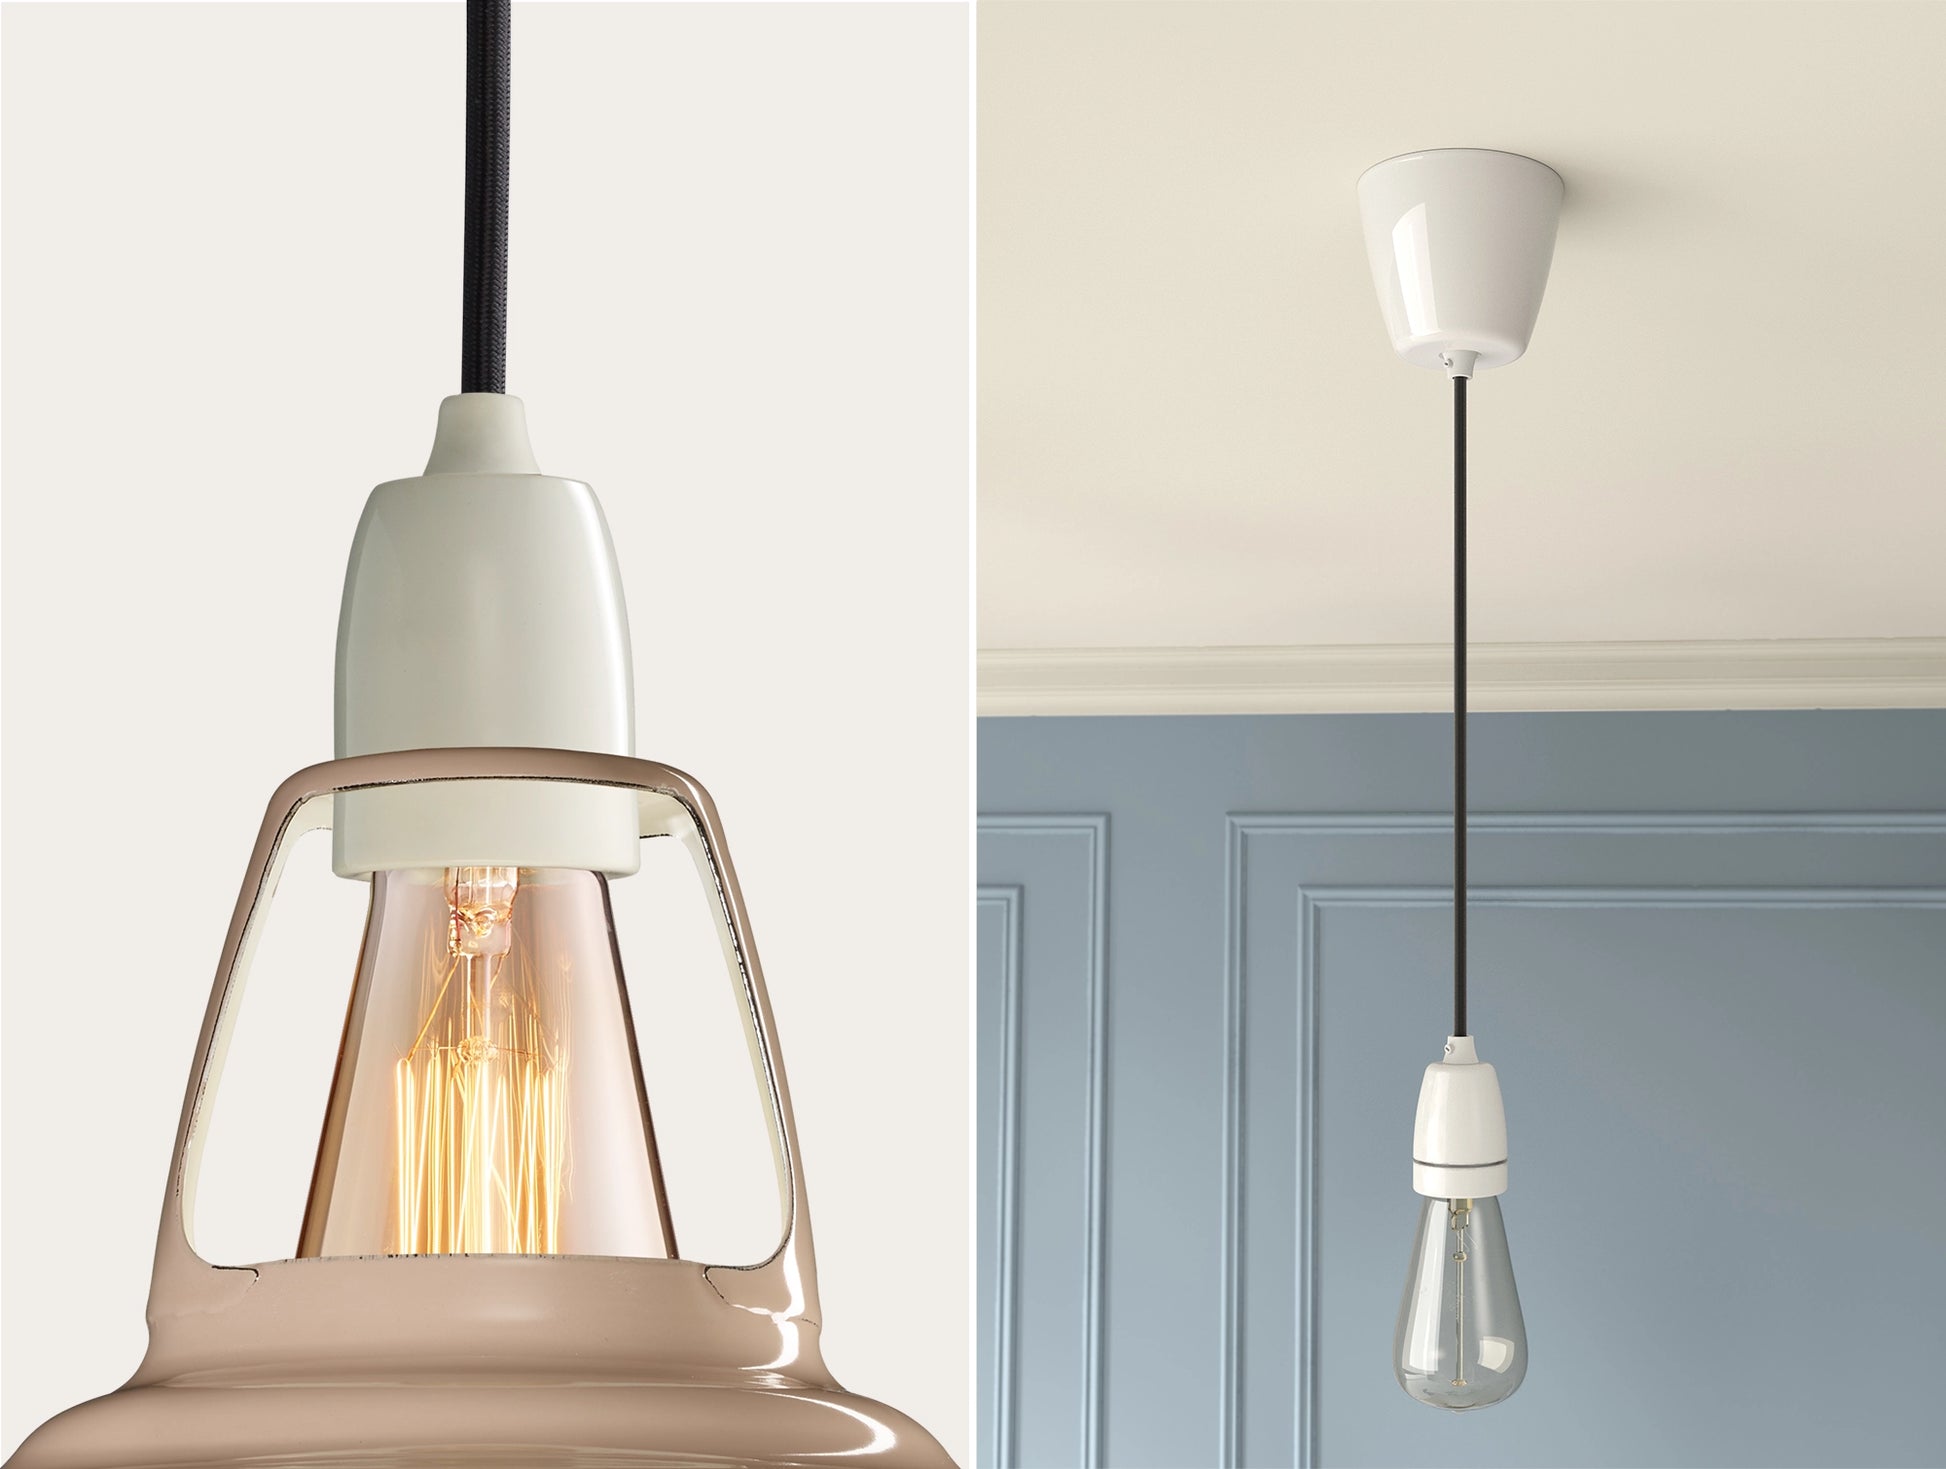 Close up of an E27 Porcelain suspension set on a Latte Brown lampshade on the left. On the right, an E27 Porcelain pendant set with a lightbulb is hanging from the ceiling